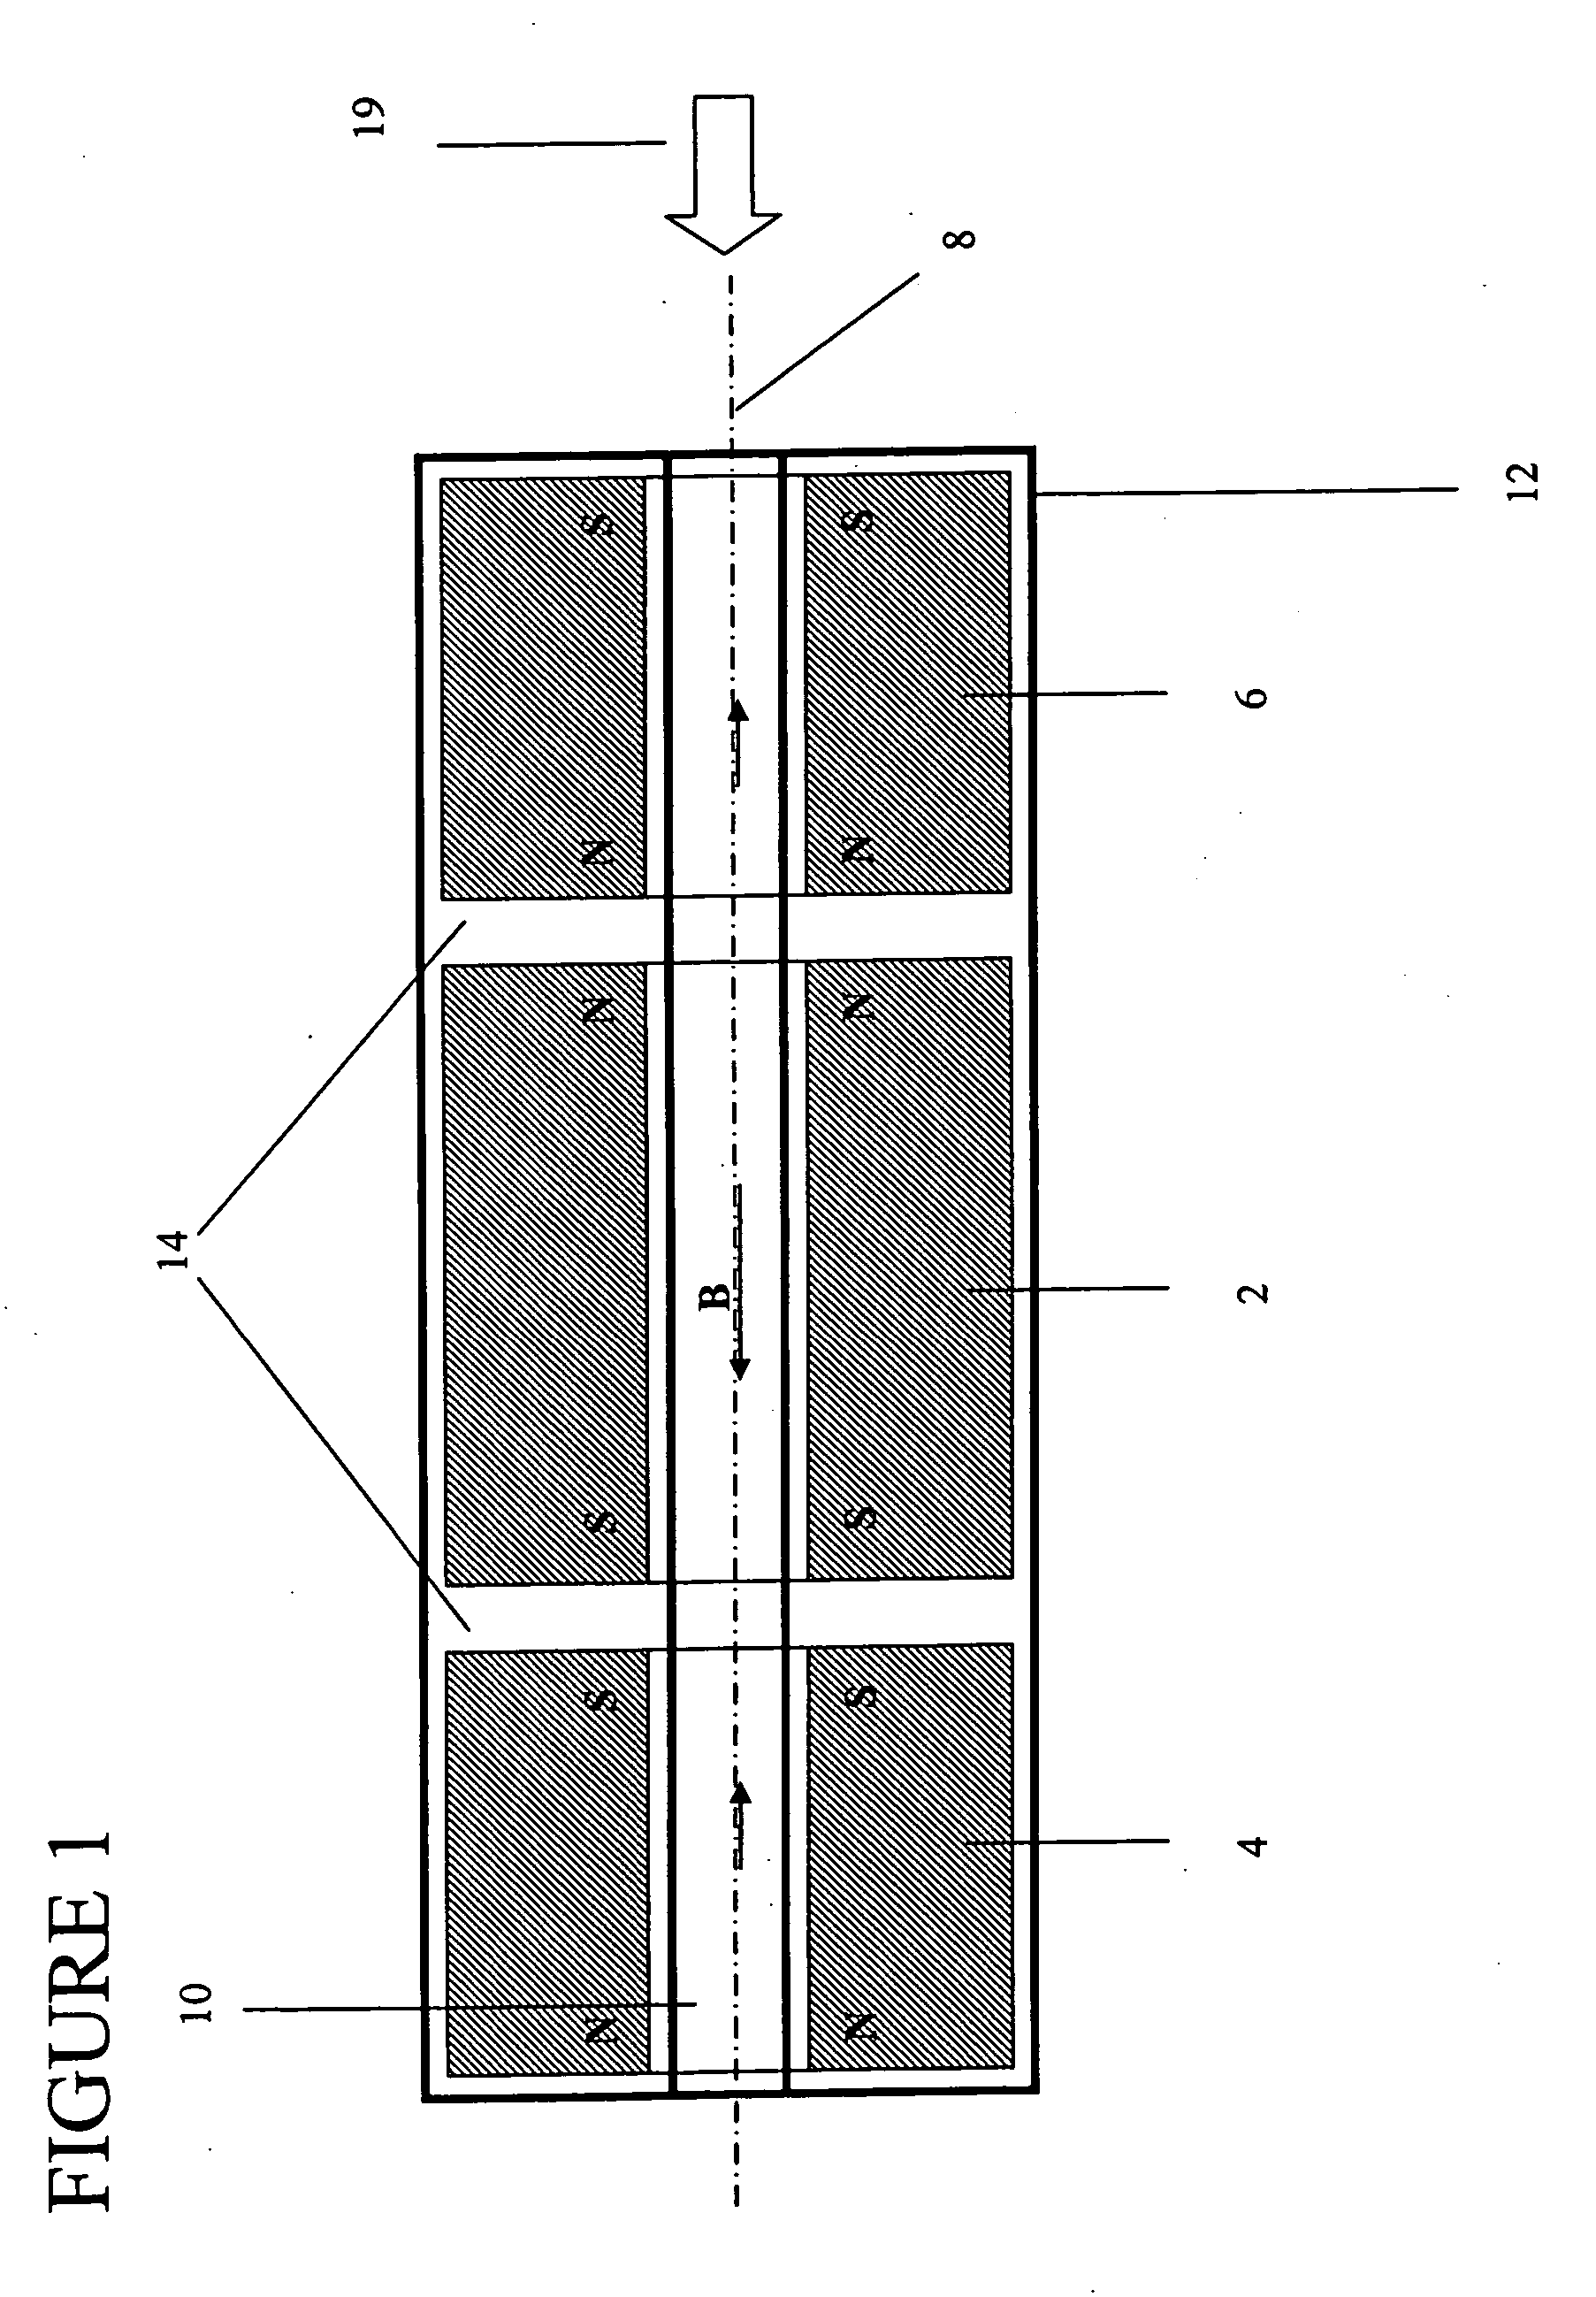 Permanent magnet structure with axial access for spectroscopy applications